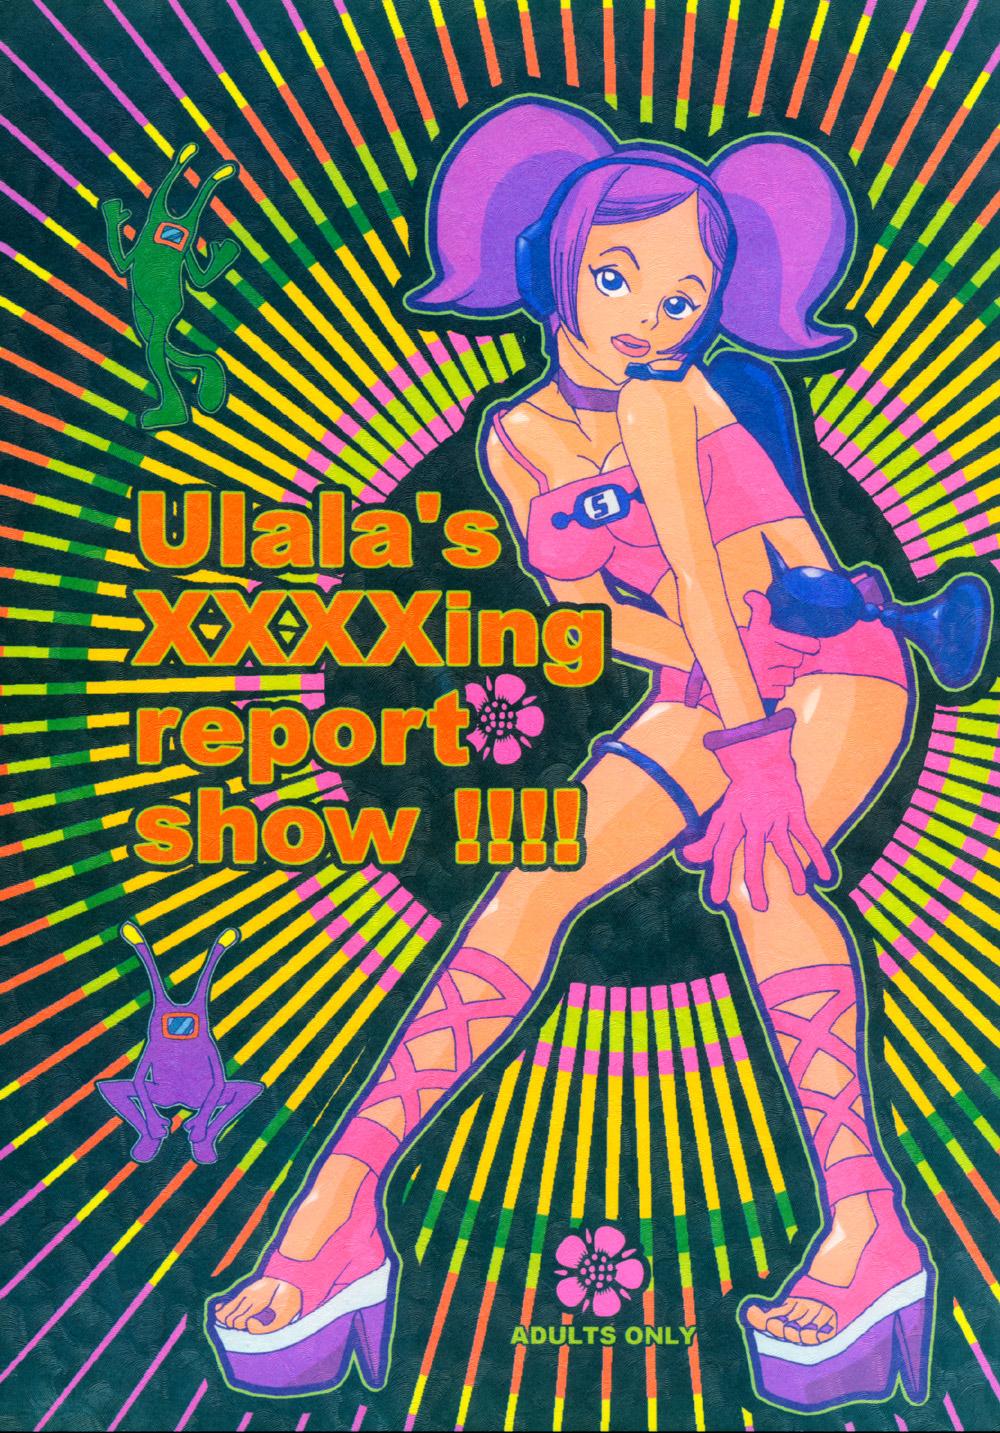 Cream Pie Ulala's XXXXing Report Show!!!! - Space channel 5 Rubdown - Picture 1